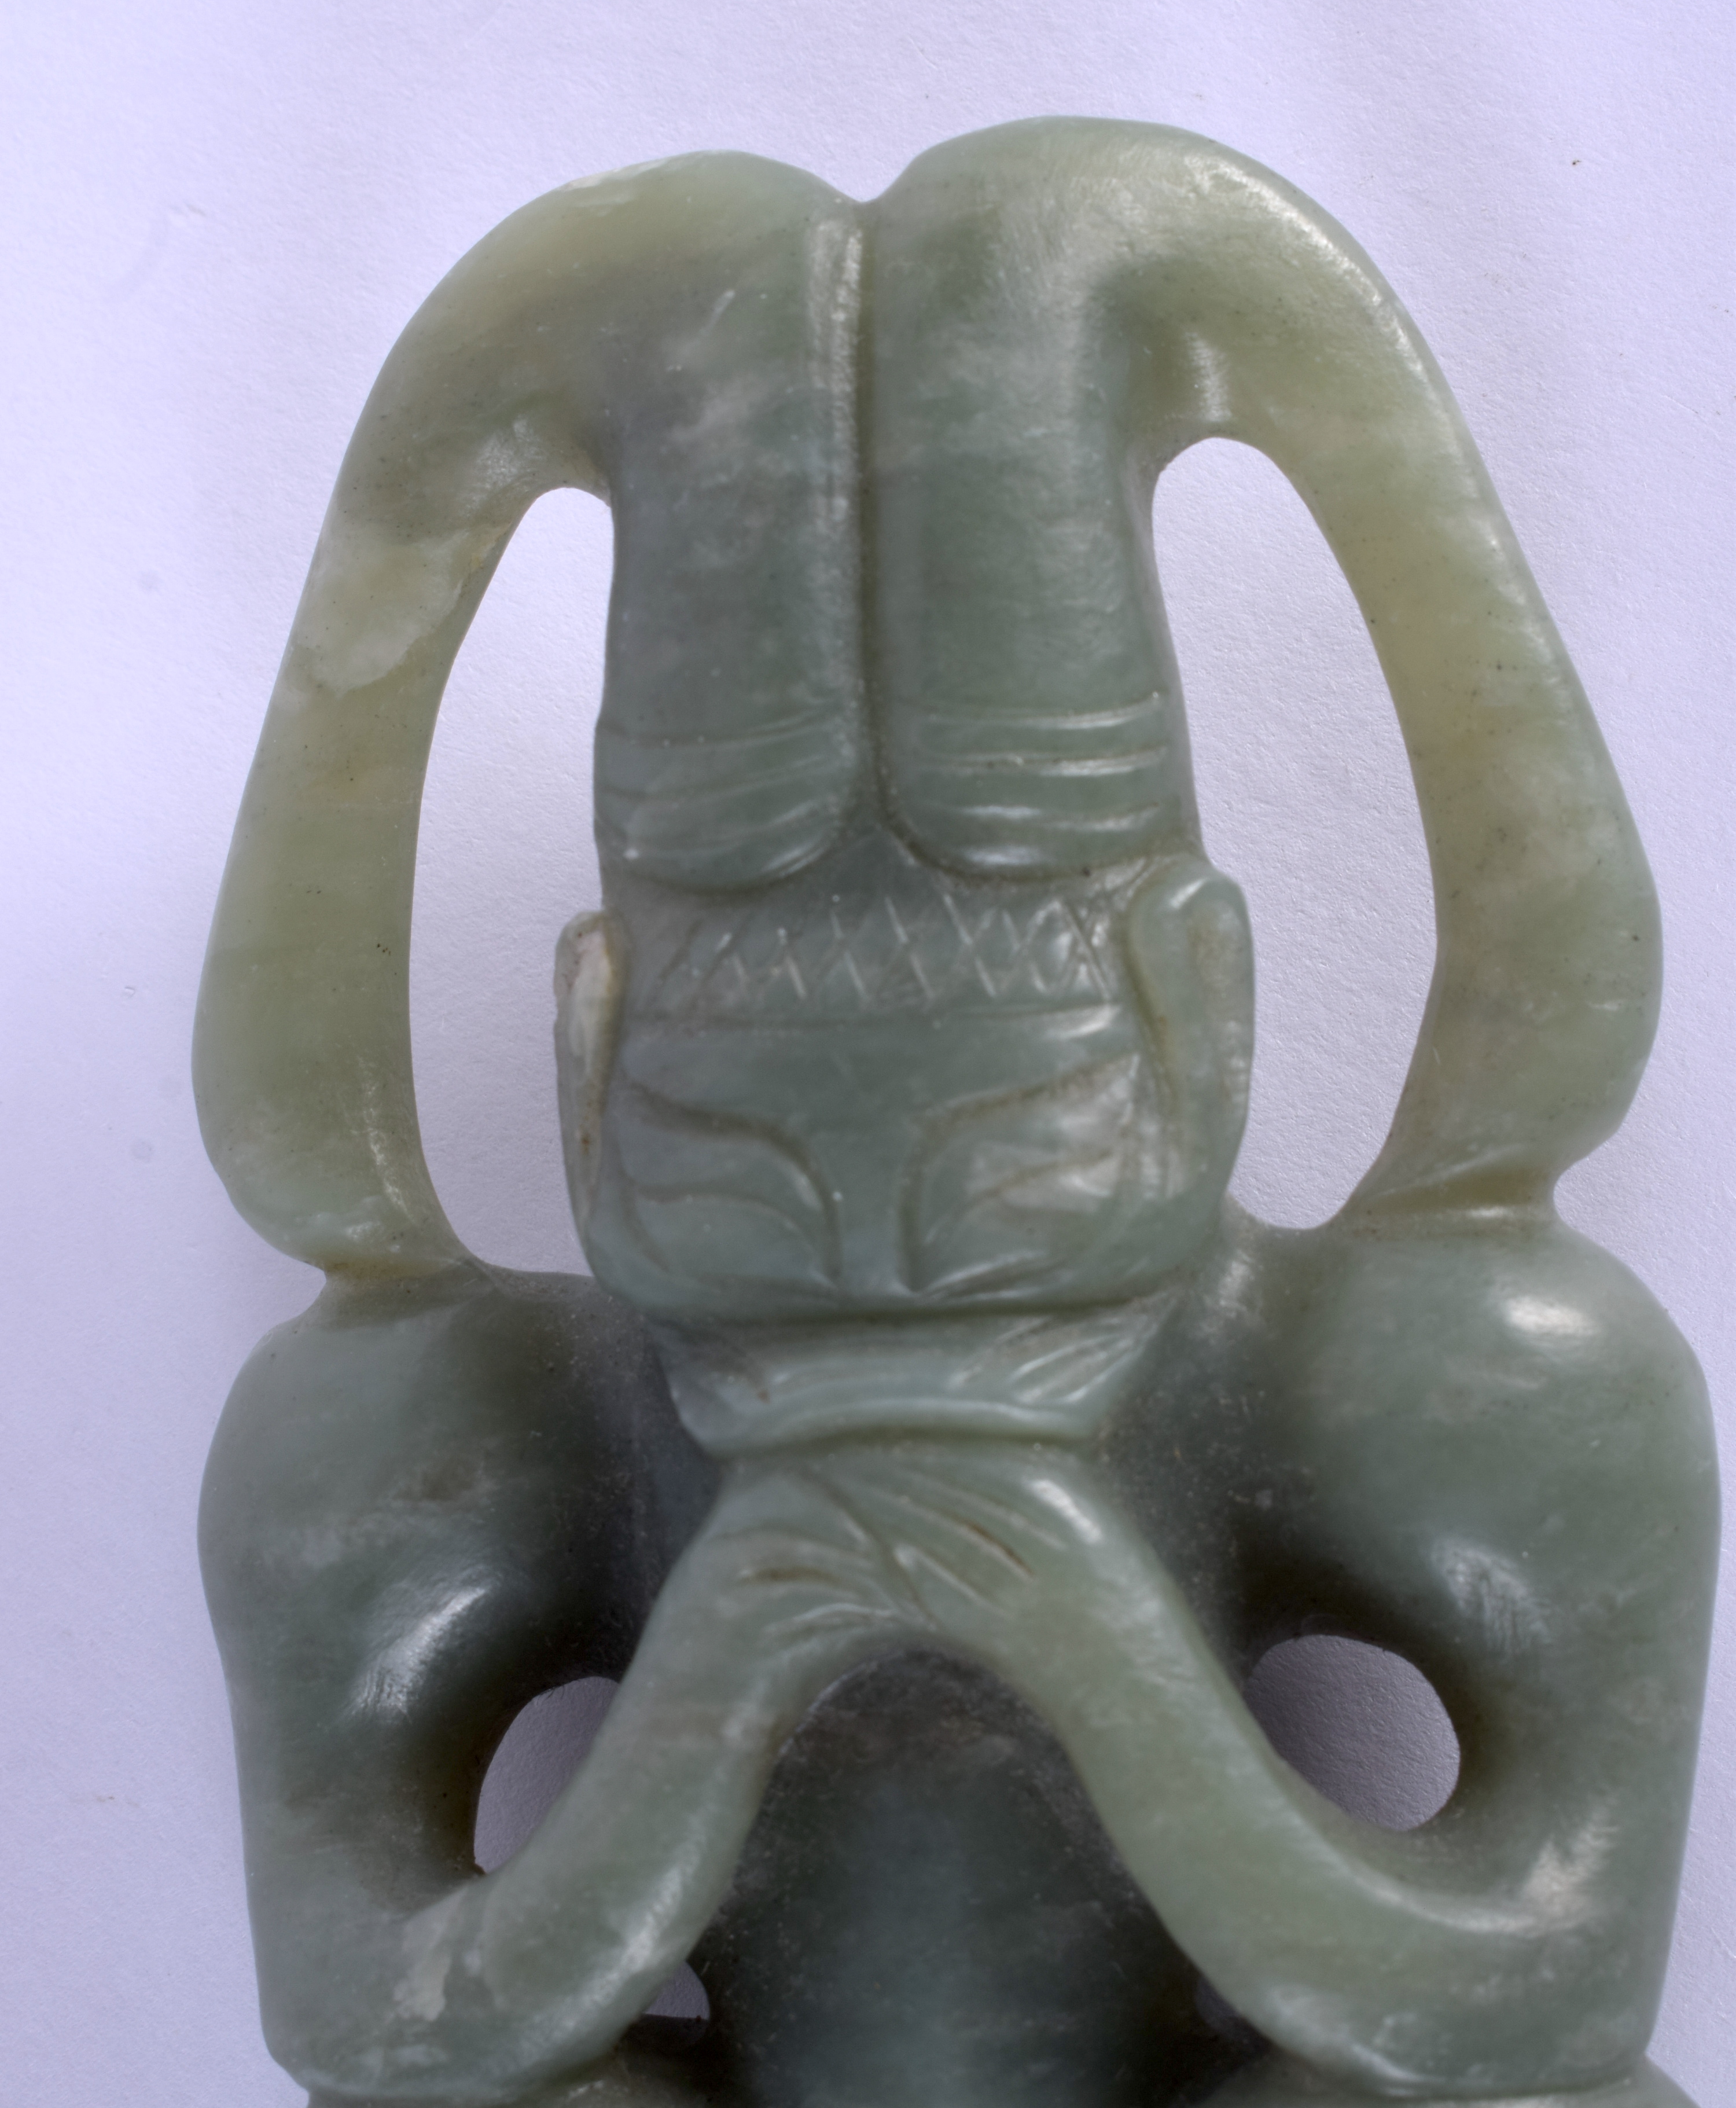 A CHINESE CARVED HONGSHAN CULTURE CARVED JADE FIGURE OF A SUN GOD possibly Neolithic period. 12 cm x - Image 8 of 11